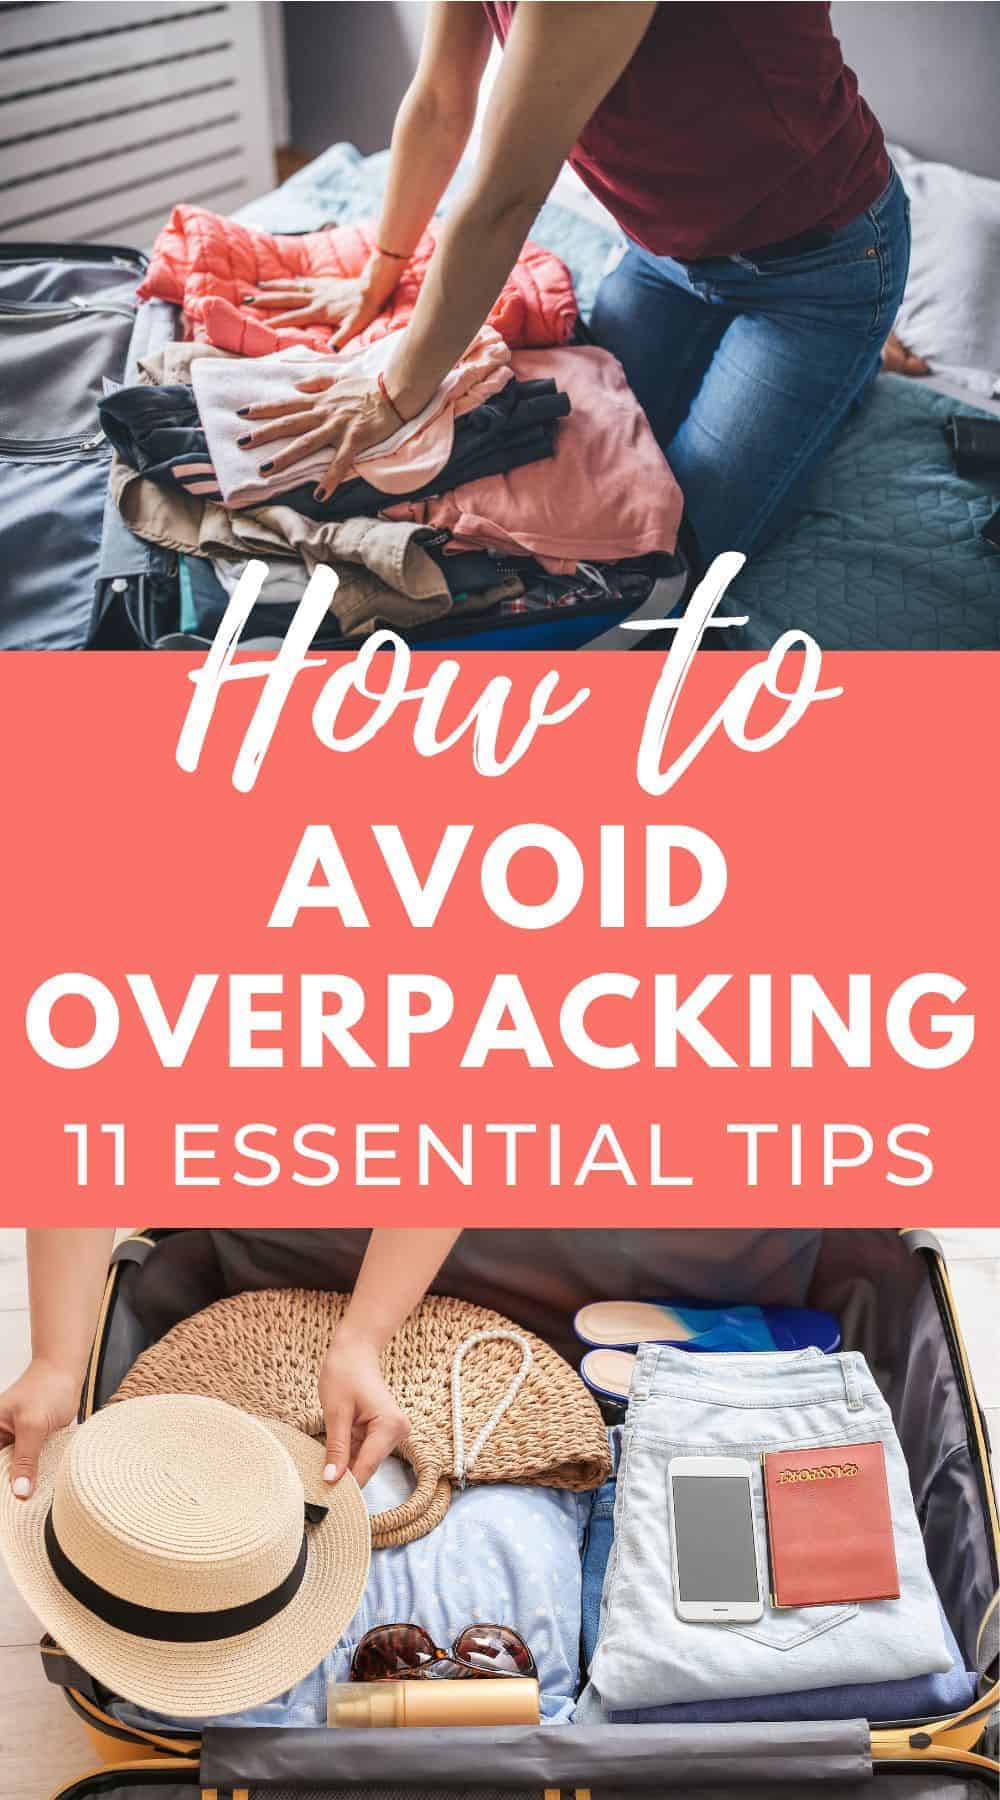 Pinterest image with two photos, one showing an overflowing suitcase, the other showing a well-packed and tidy suitcase. Pin text reads "how to avoid overpacking, 11 essential tips."